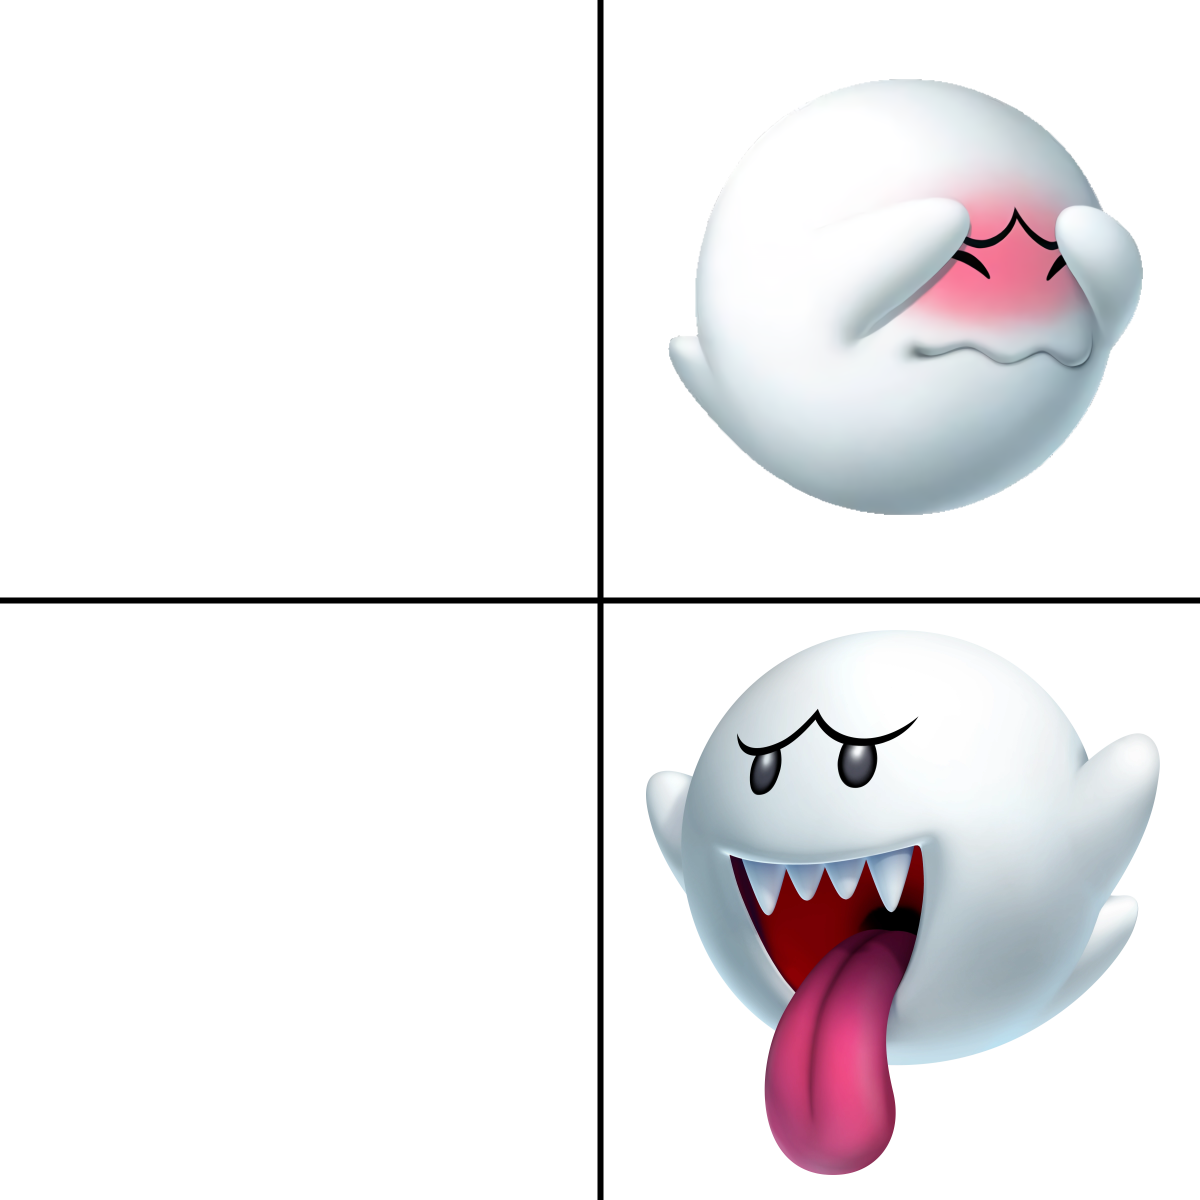 High Quality Drake alternative with Boo ghost from Super Mario (right side) Blank Meme Template